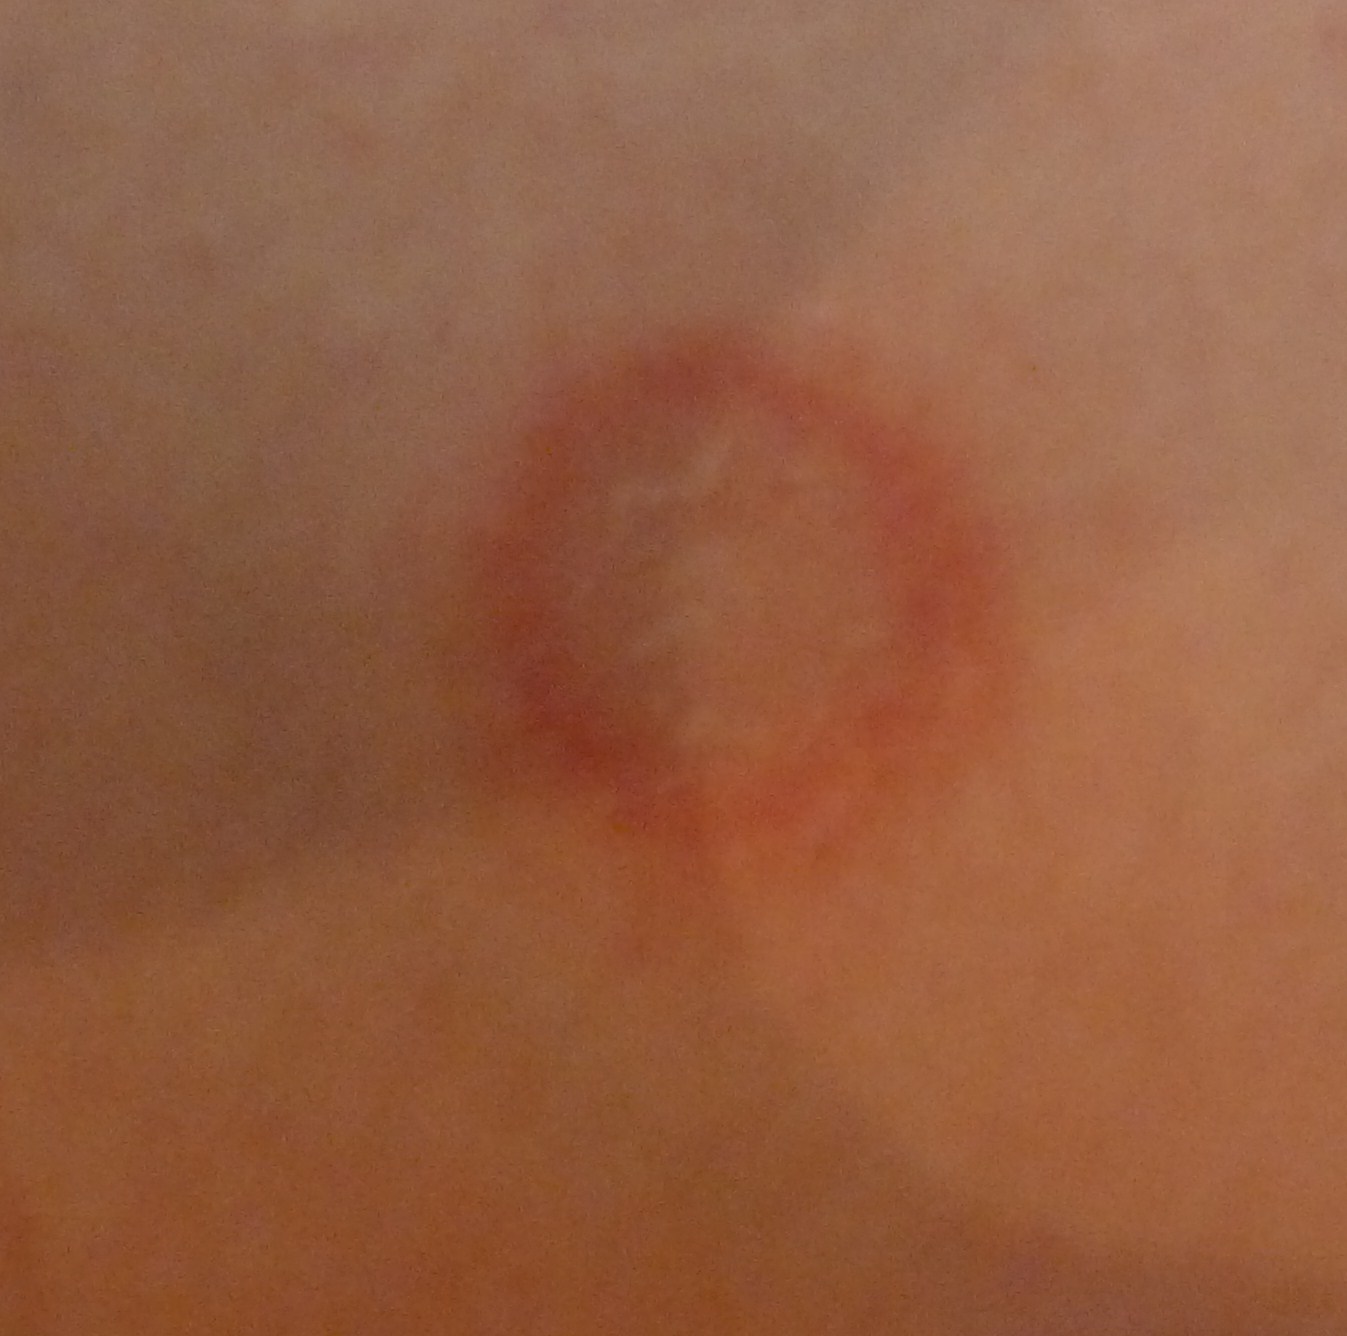 What Causes Ringworm – MedicineNet